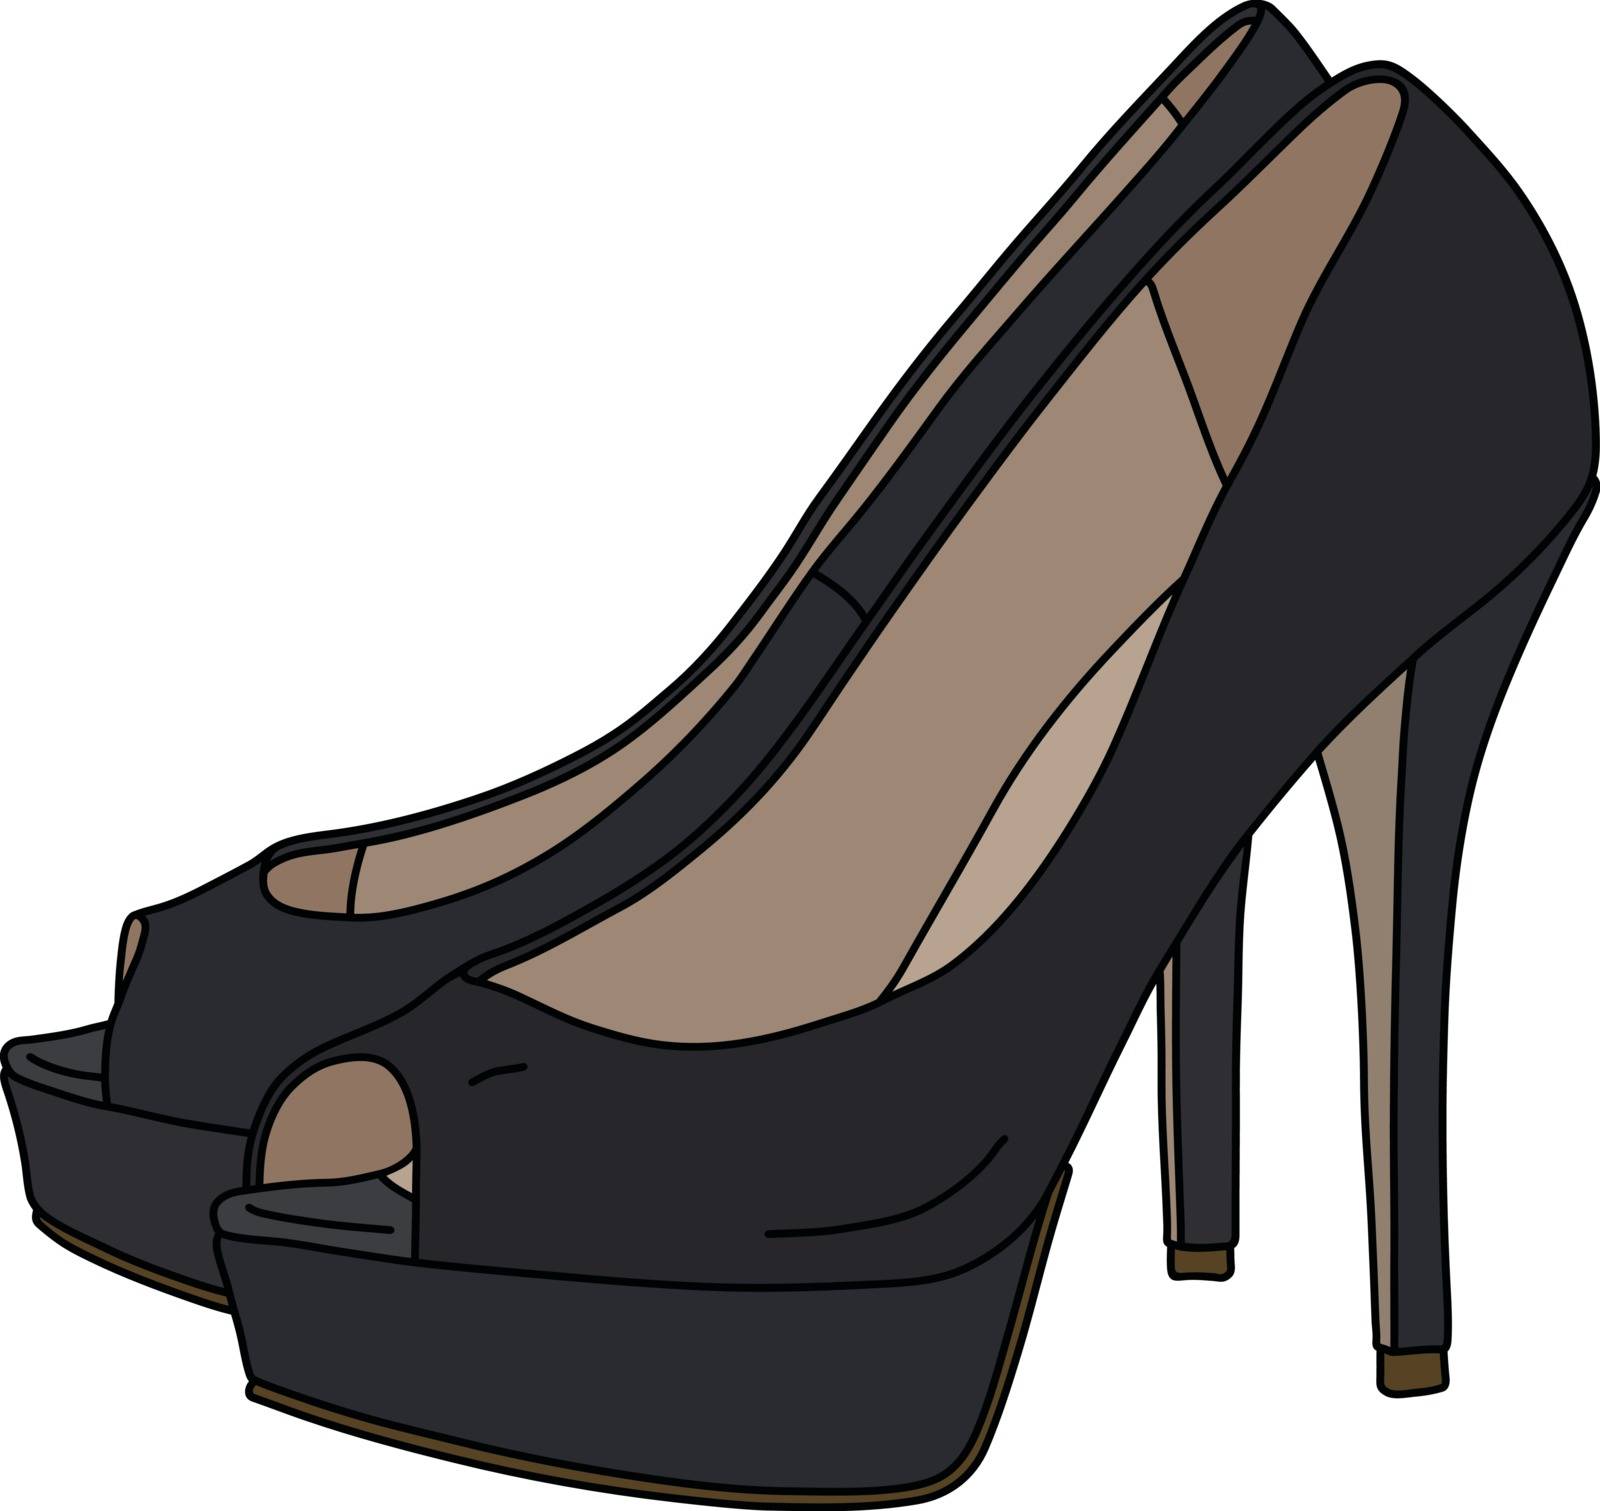 The black shoes on high heels by vostal